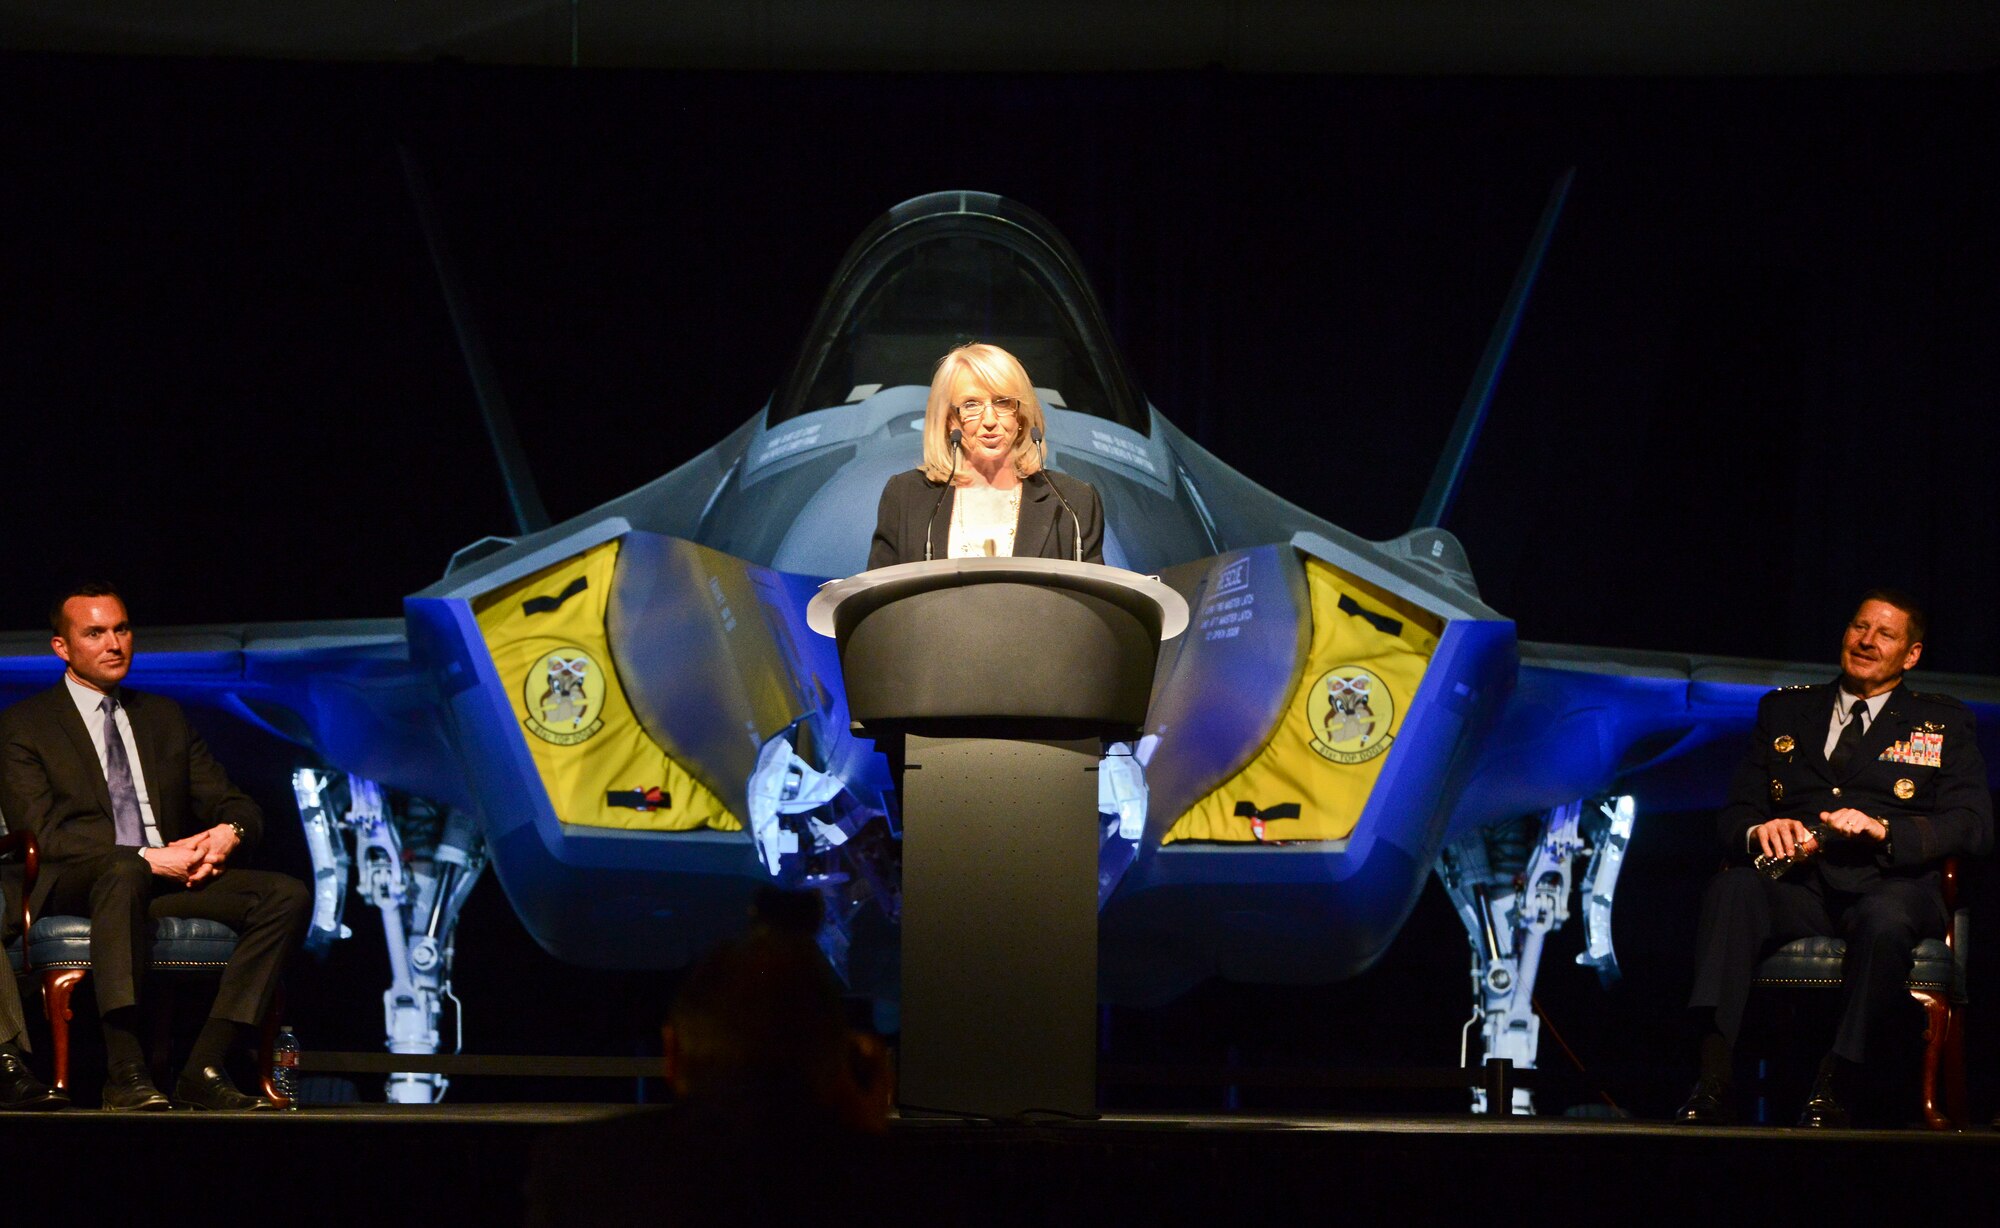 Arizona Governor Jan Brewer addresses an audience of approximately 500 community leaders, elected officials, representatives from partner nation air forces and Luke Airmen during an unveiling ceremony on March 14 at Luke Air Force Base for the 56th Fighter Wing’s first F-35 Lightning II fighter jet. Brewer was joined on stage by Undersecretary of the Air Force Eric Fanning (left) and Gen. Robin Rand, commander of Air Education and Training Command (right). “I am thrilled for all the military, for the residents of the West Valley and for our state,” the governor said. “I’m immensely proud to stand with you to welcome this incredible aircraft to the Valley of the Sun.” (U.S. Air Force photo by Senior Airman Devante Williams)